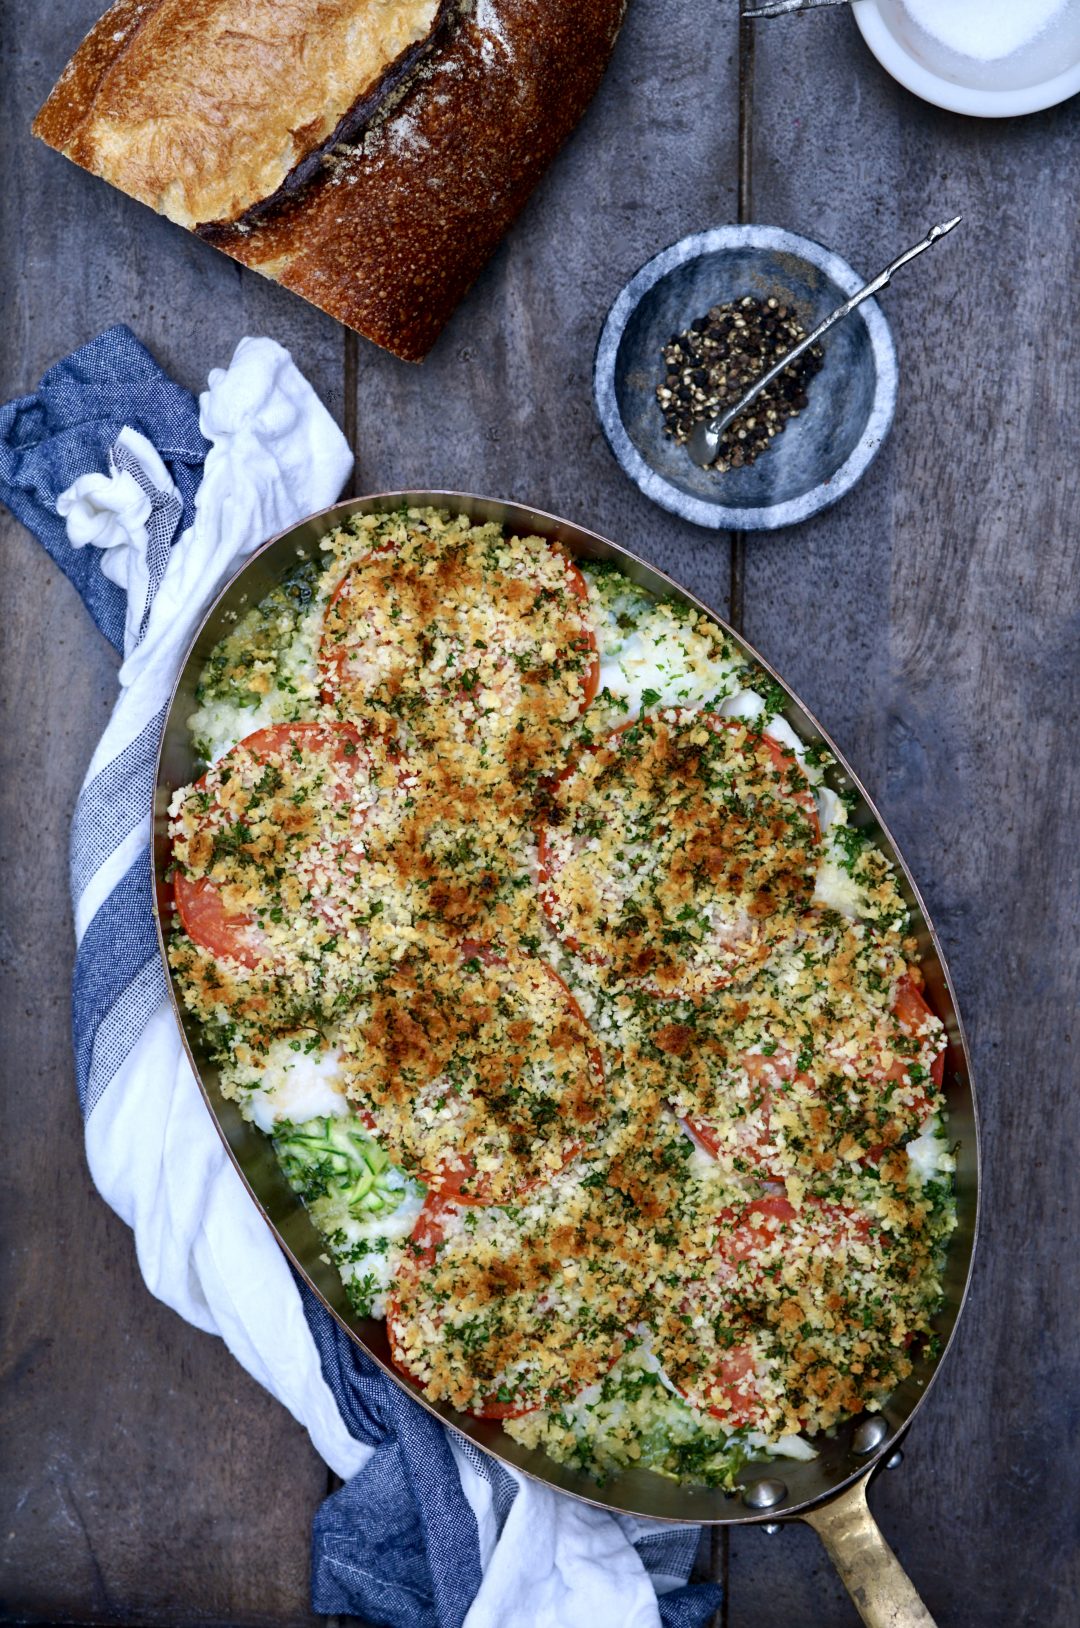 Gratin of Haddock With Zucchini And Tomato